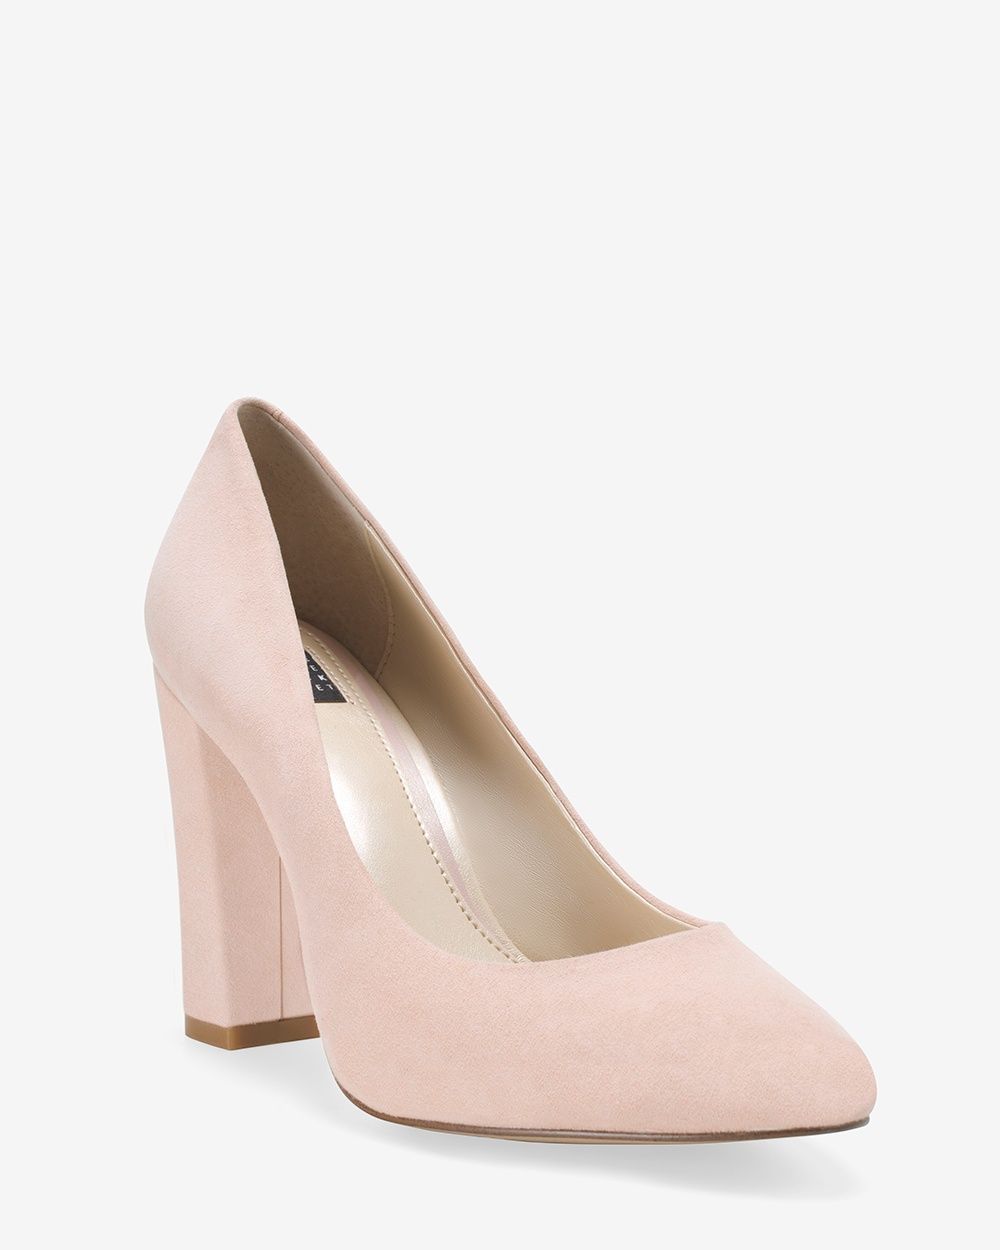 Women's Mila Suede Chunky Heels by White House Black Market | White House Black Market